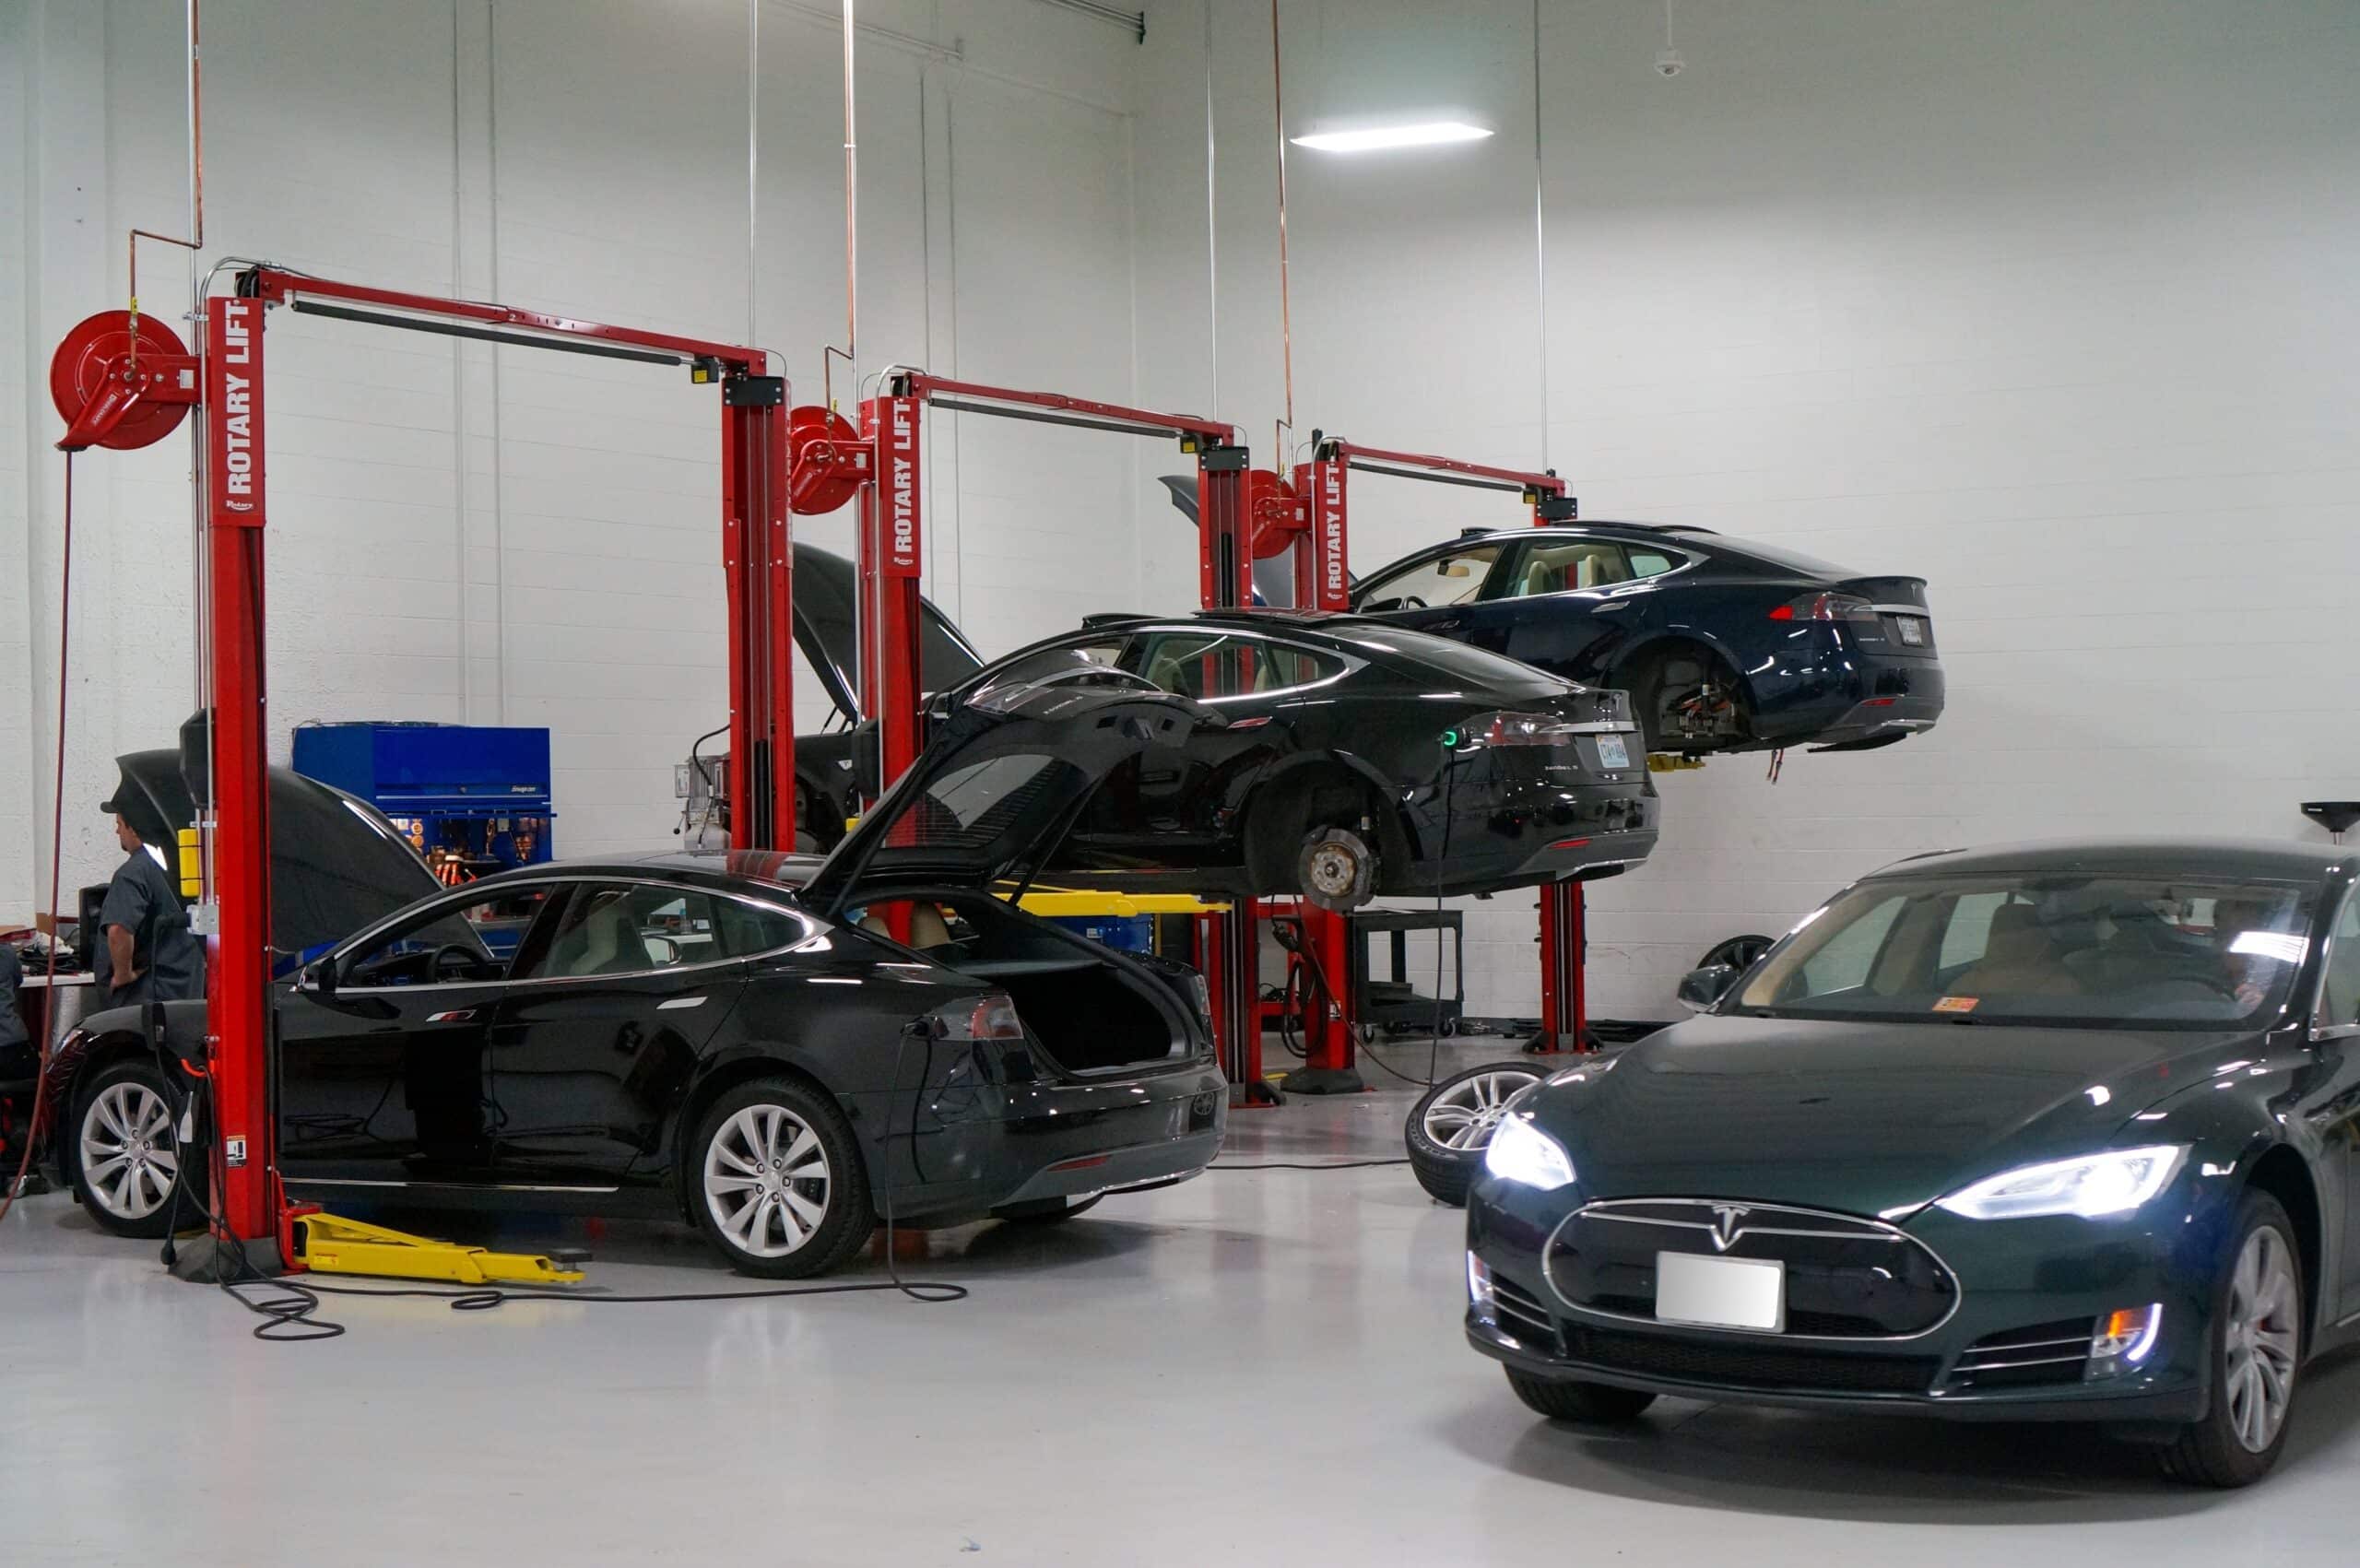 Advanced European Repair | Franklin's Premier Hybrid/EV Repair Specialists. Image of black ev cars on lifts in shop, while one is parked behind them on the shop floor.